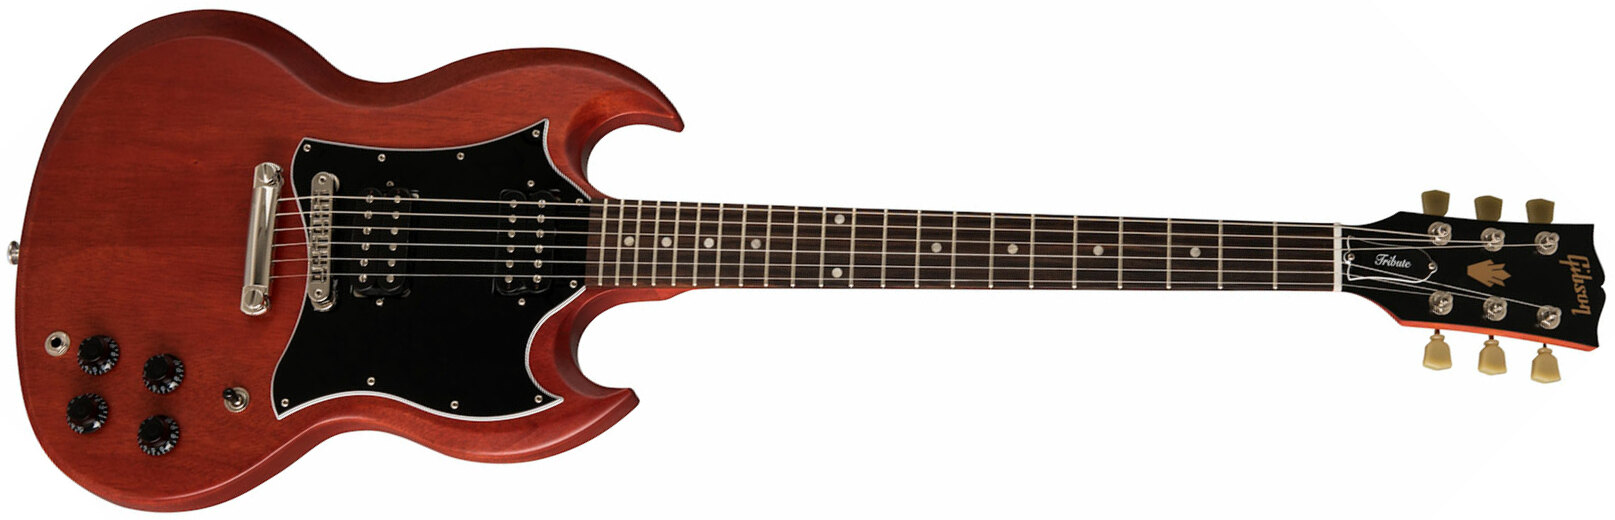 Gibson Sg Tribute Modern 2h Ht Rw - Vintage Cherry Satin - Retro rock electric guitar - Main picture